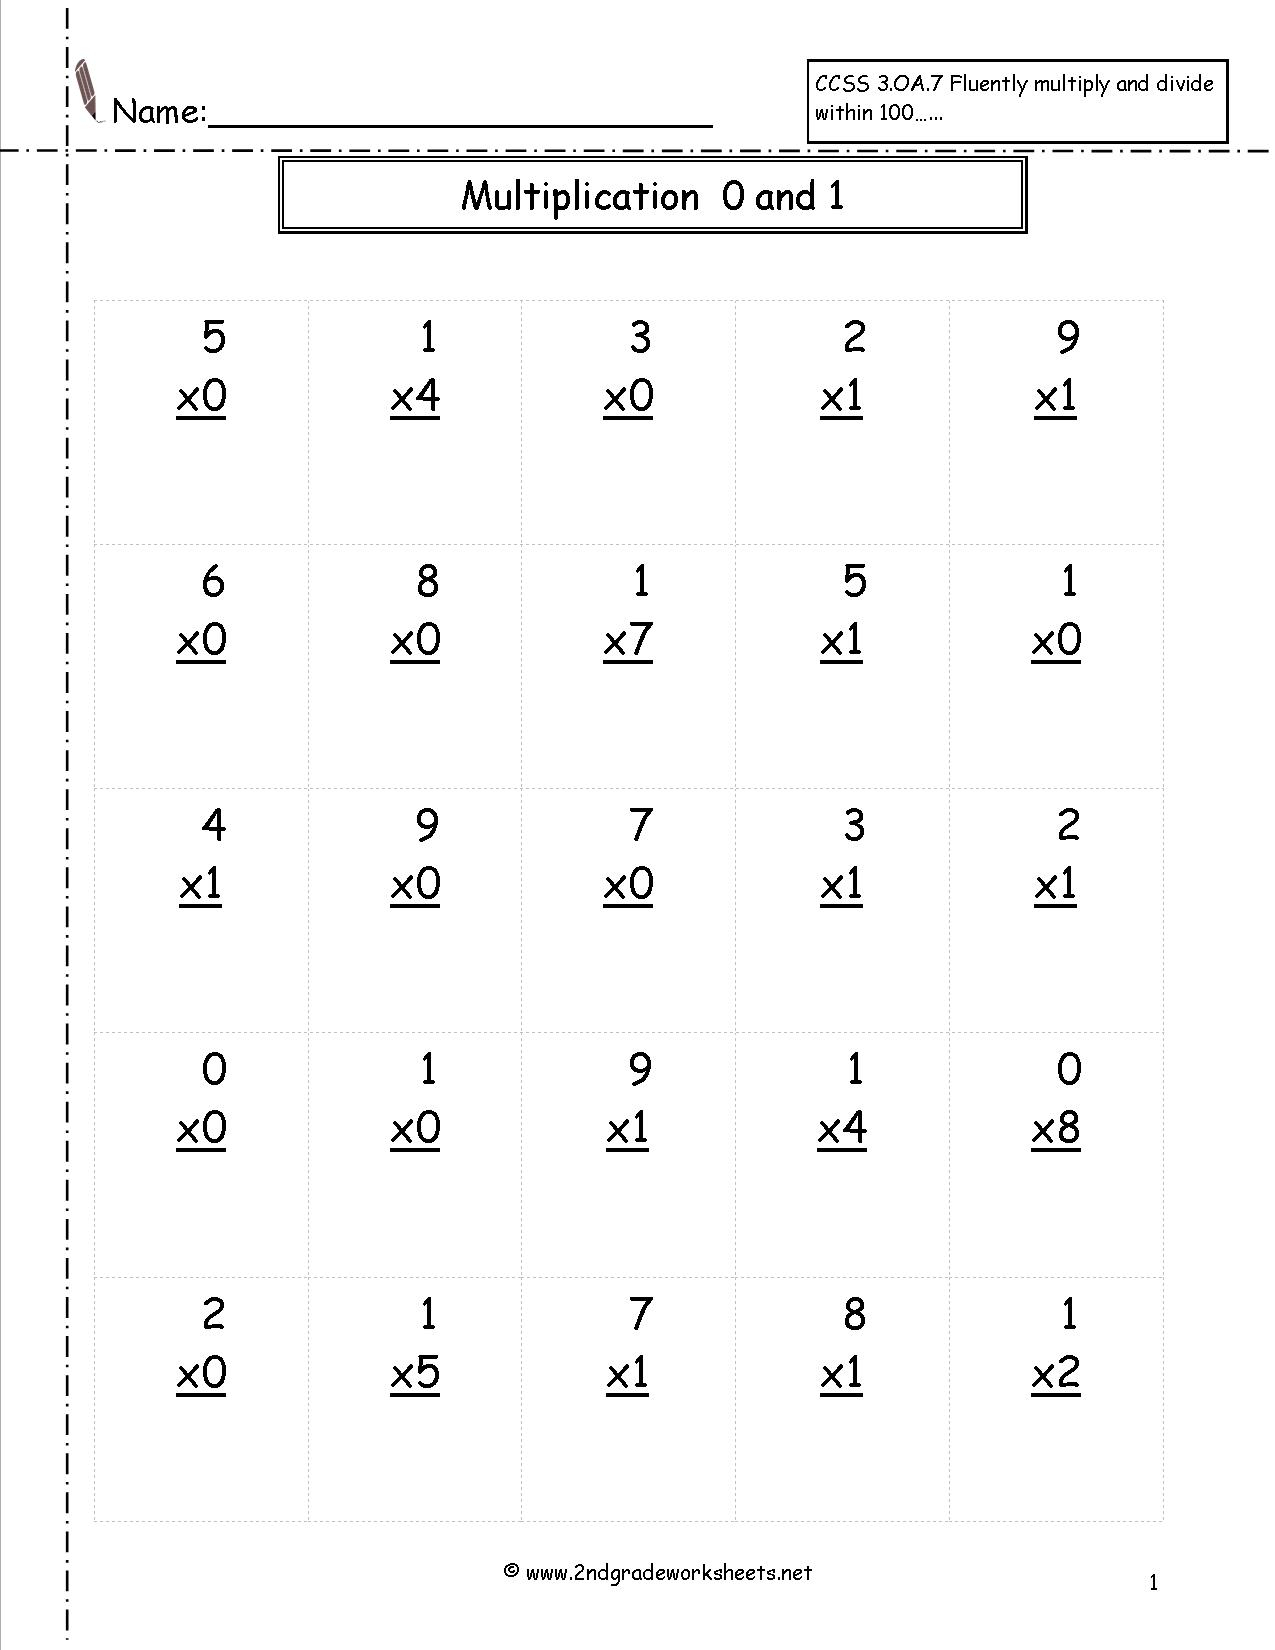 Multiplication Worksheets And Printouts inside Printable Multiplication Worksheets Free